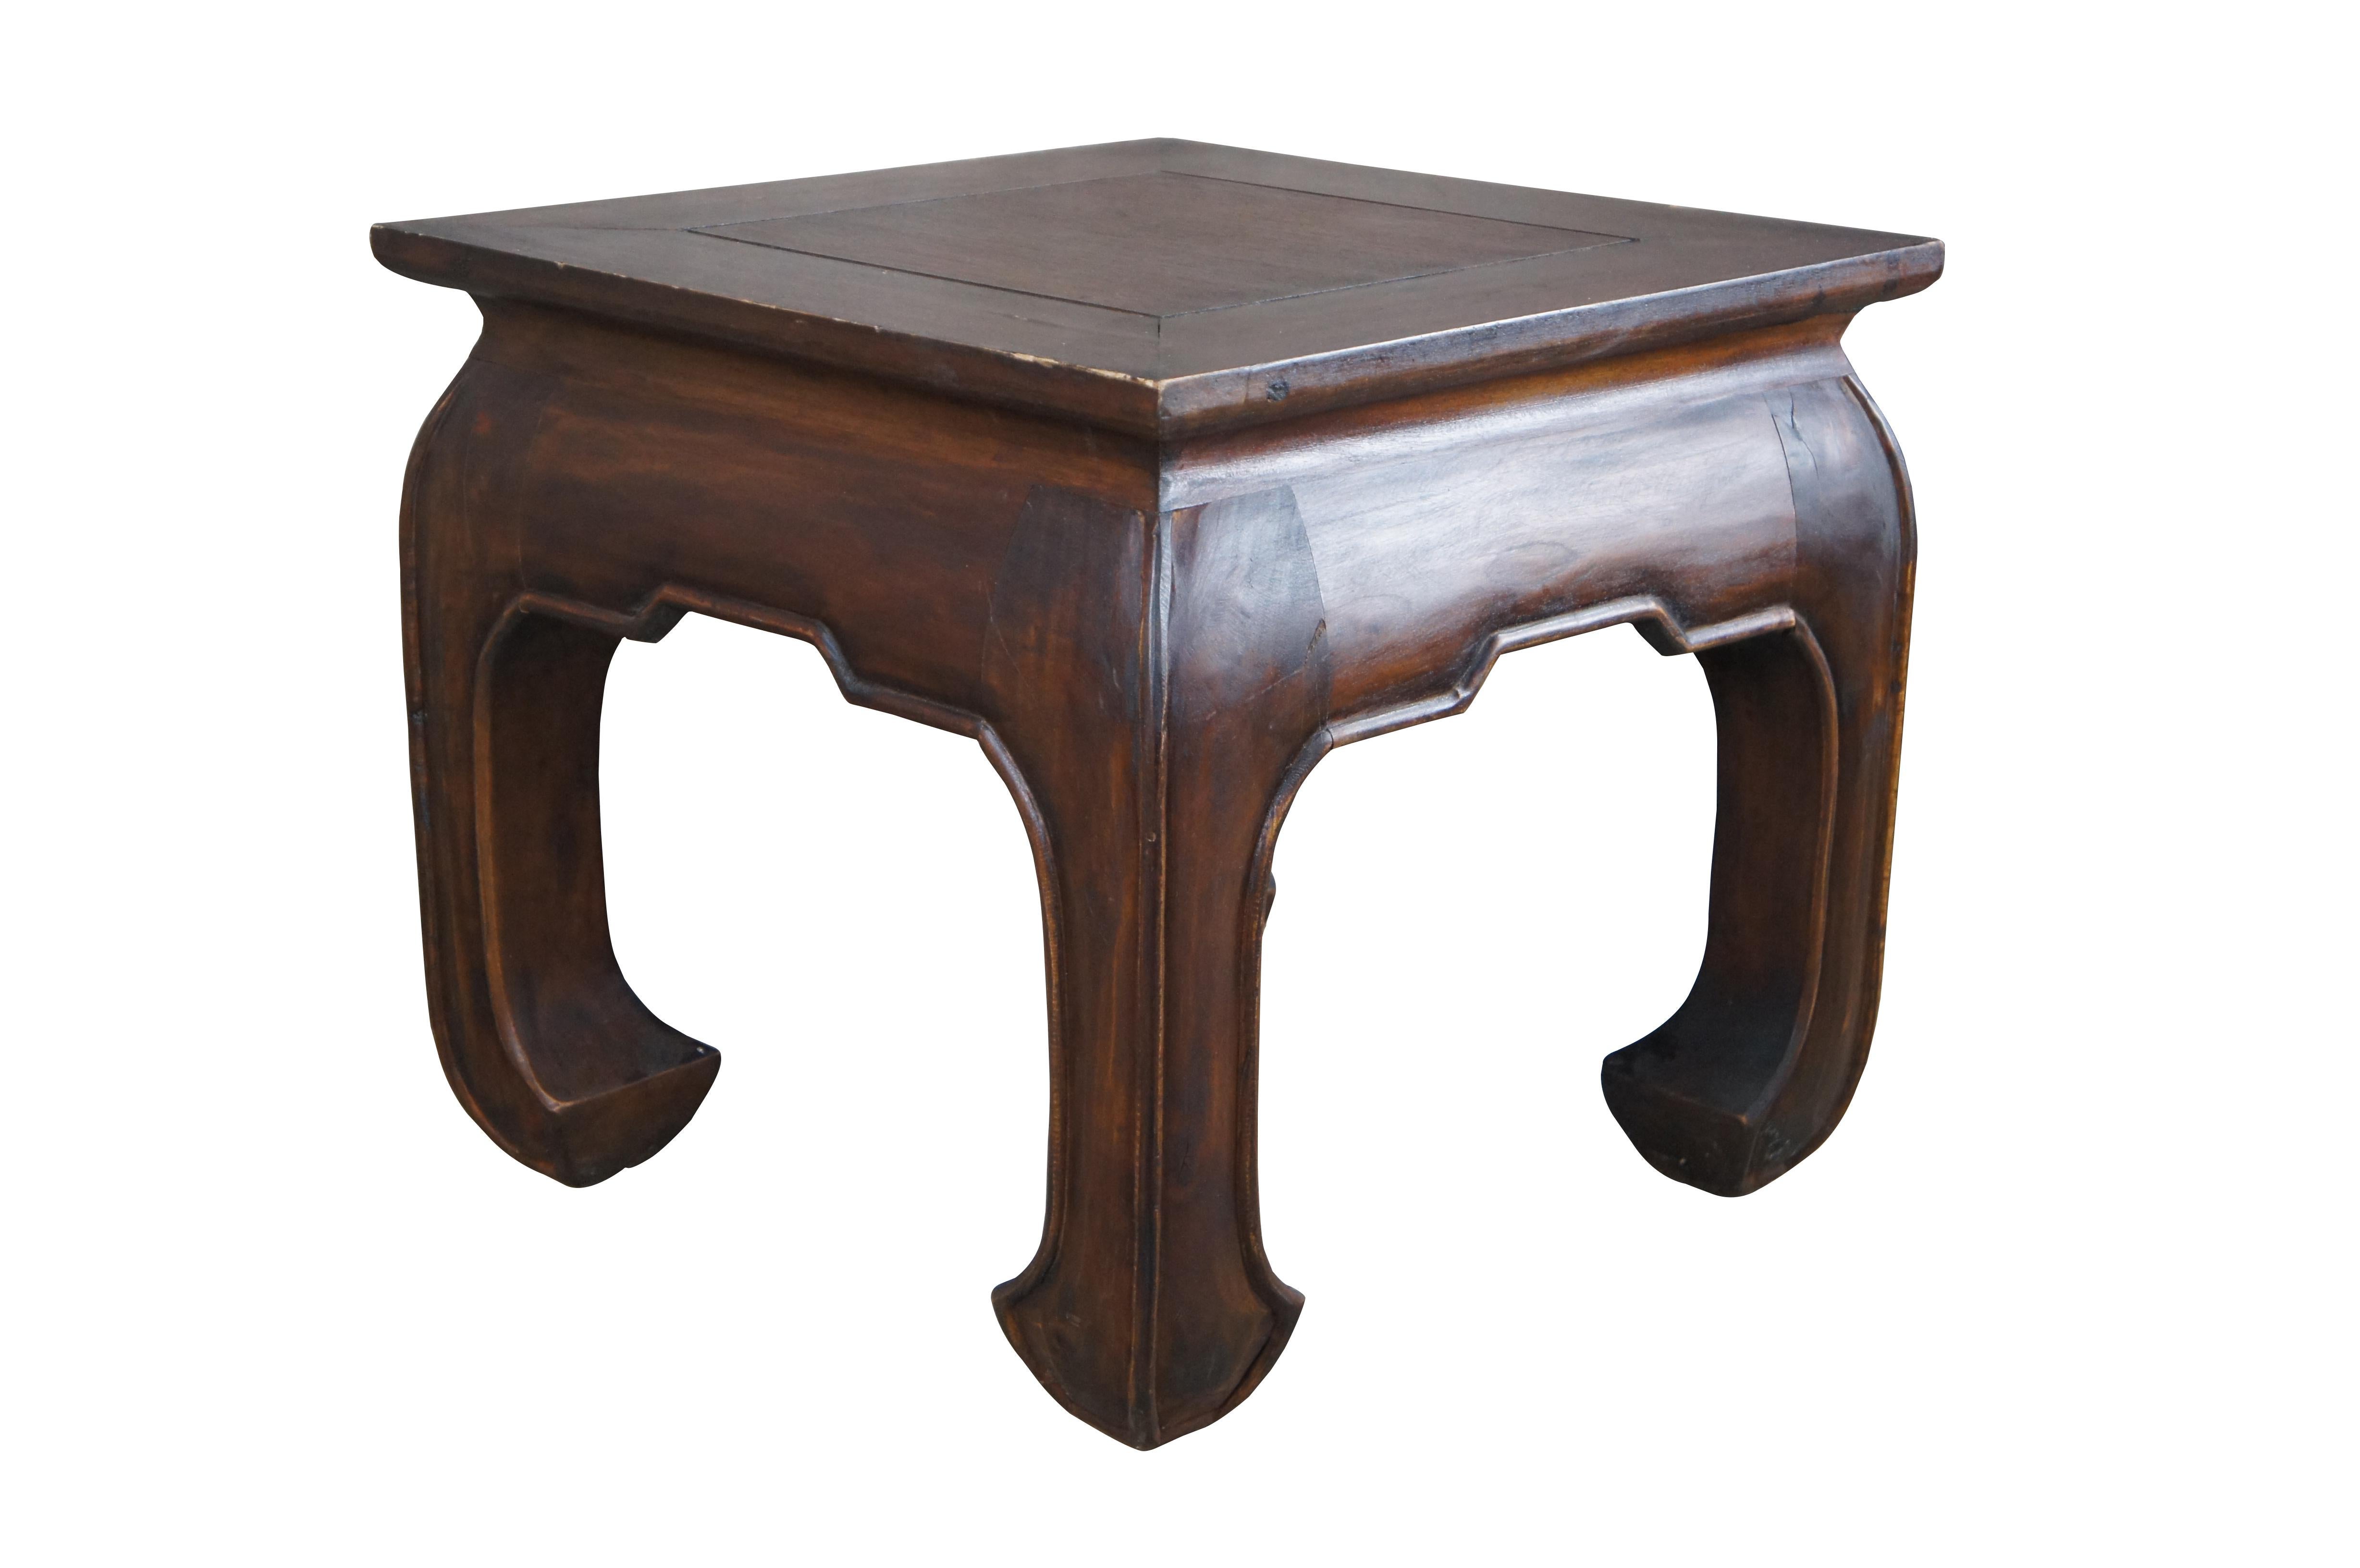 Chinese Ming style accent table. Make from teak with a square frame over contoured apron and traditional form legs.

Dimensions:
19.5